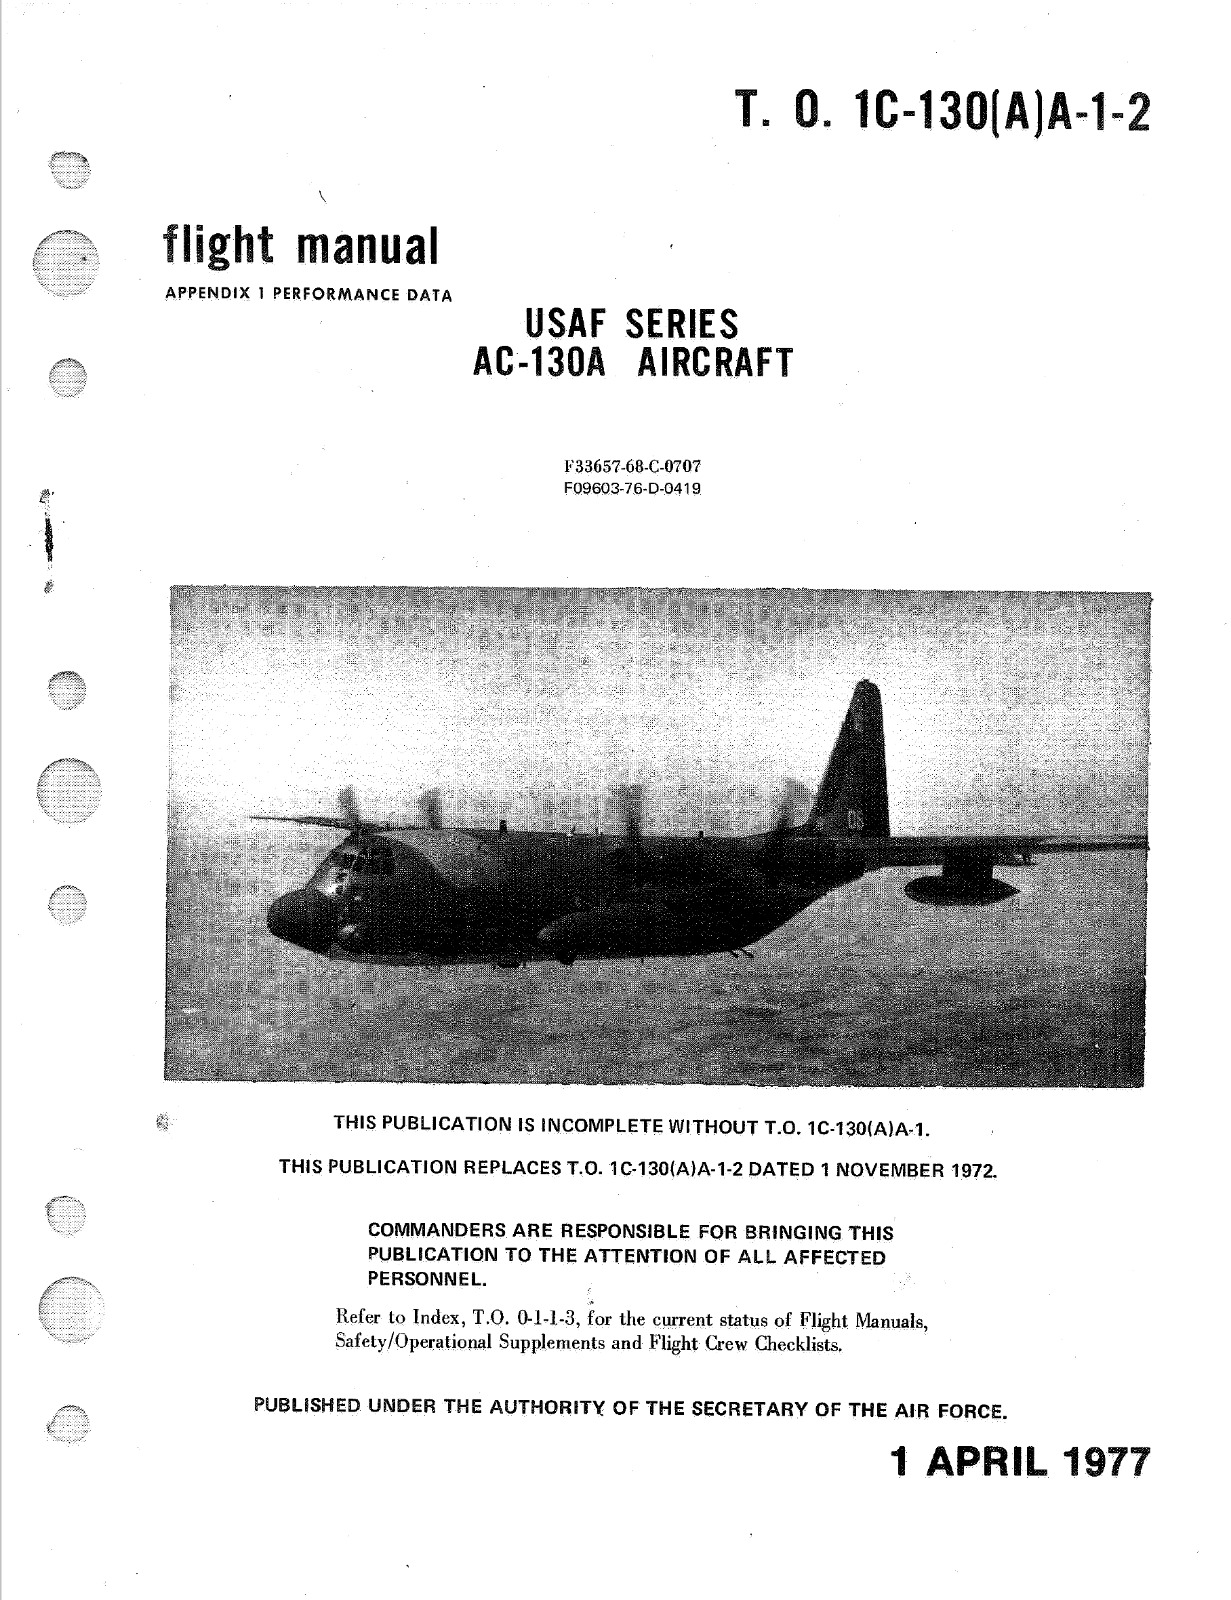 280 Page 1977 C-130A AC-130A Hercules TO 1C-130(A)A-1-2 AF Flight Manual on CD